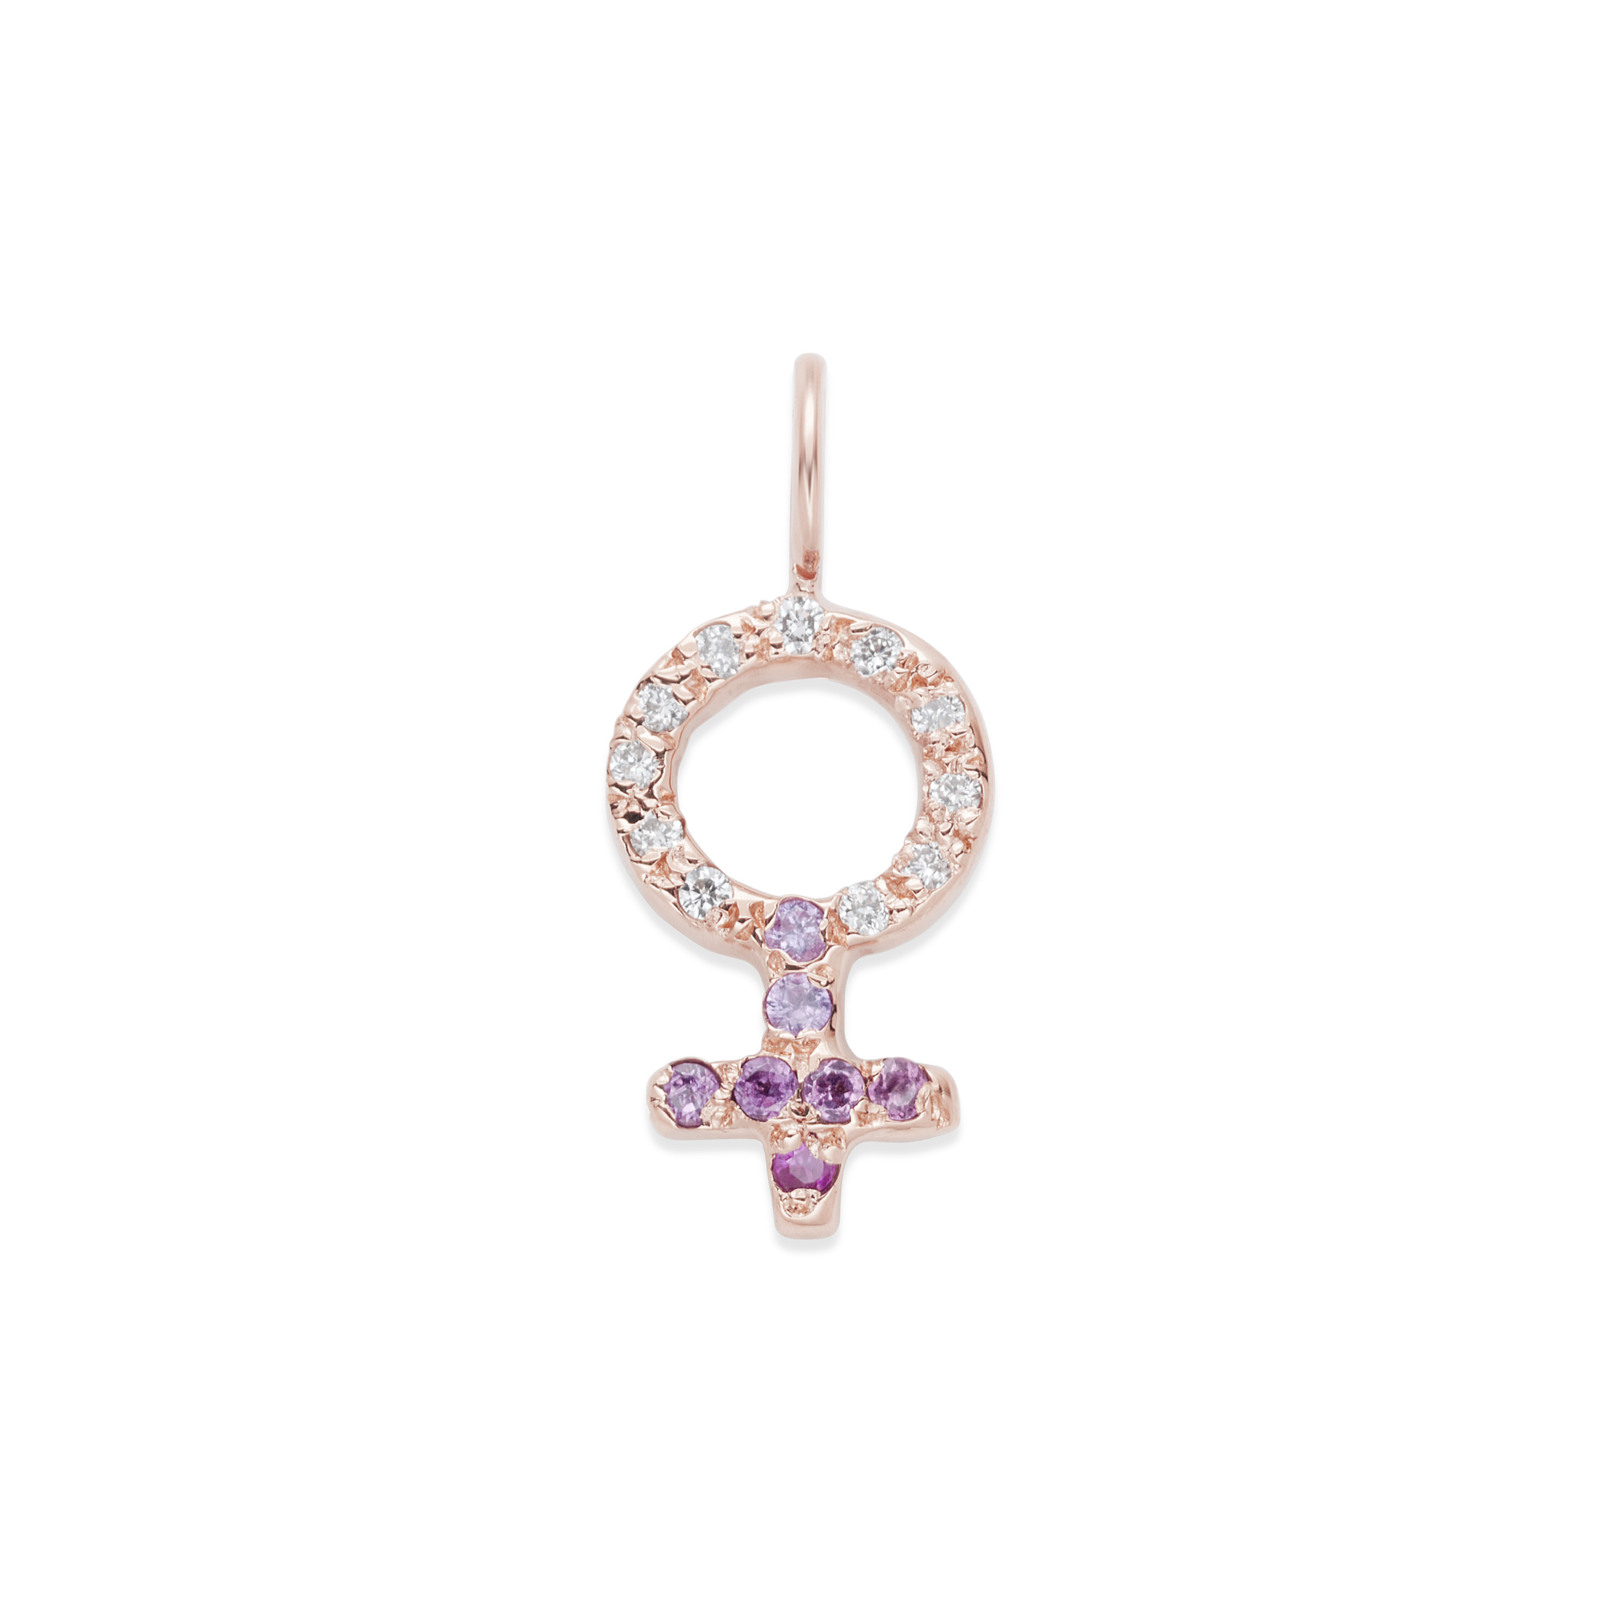 Female Symbol 14k Pink Gold Charm with diamonds and gemstones